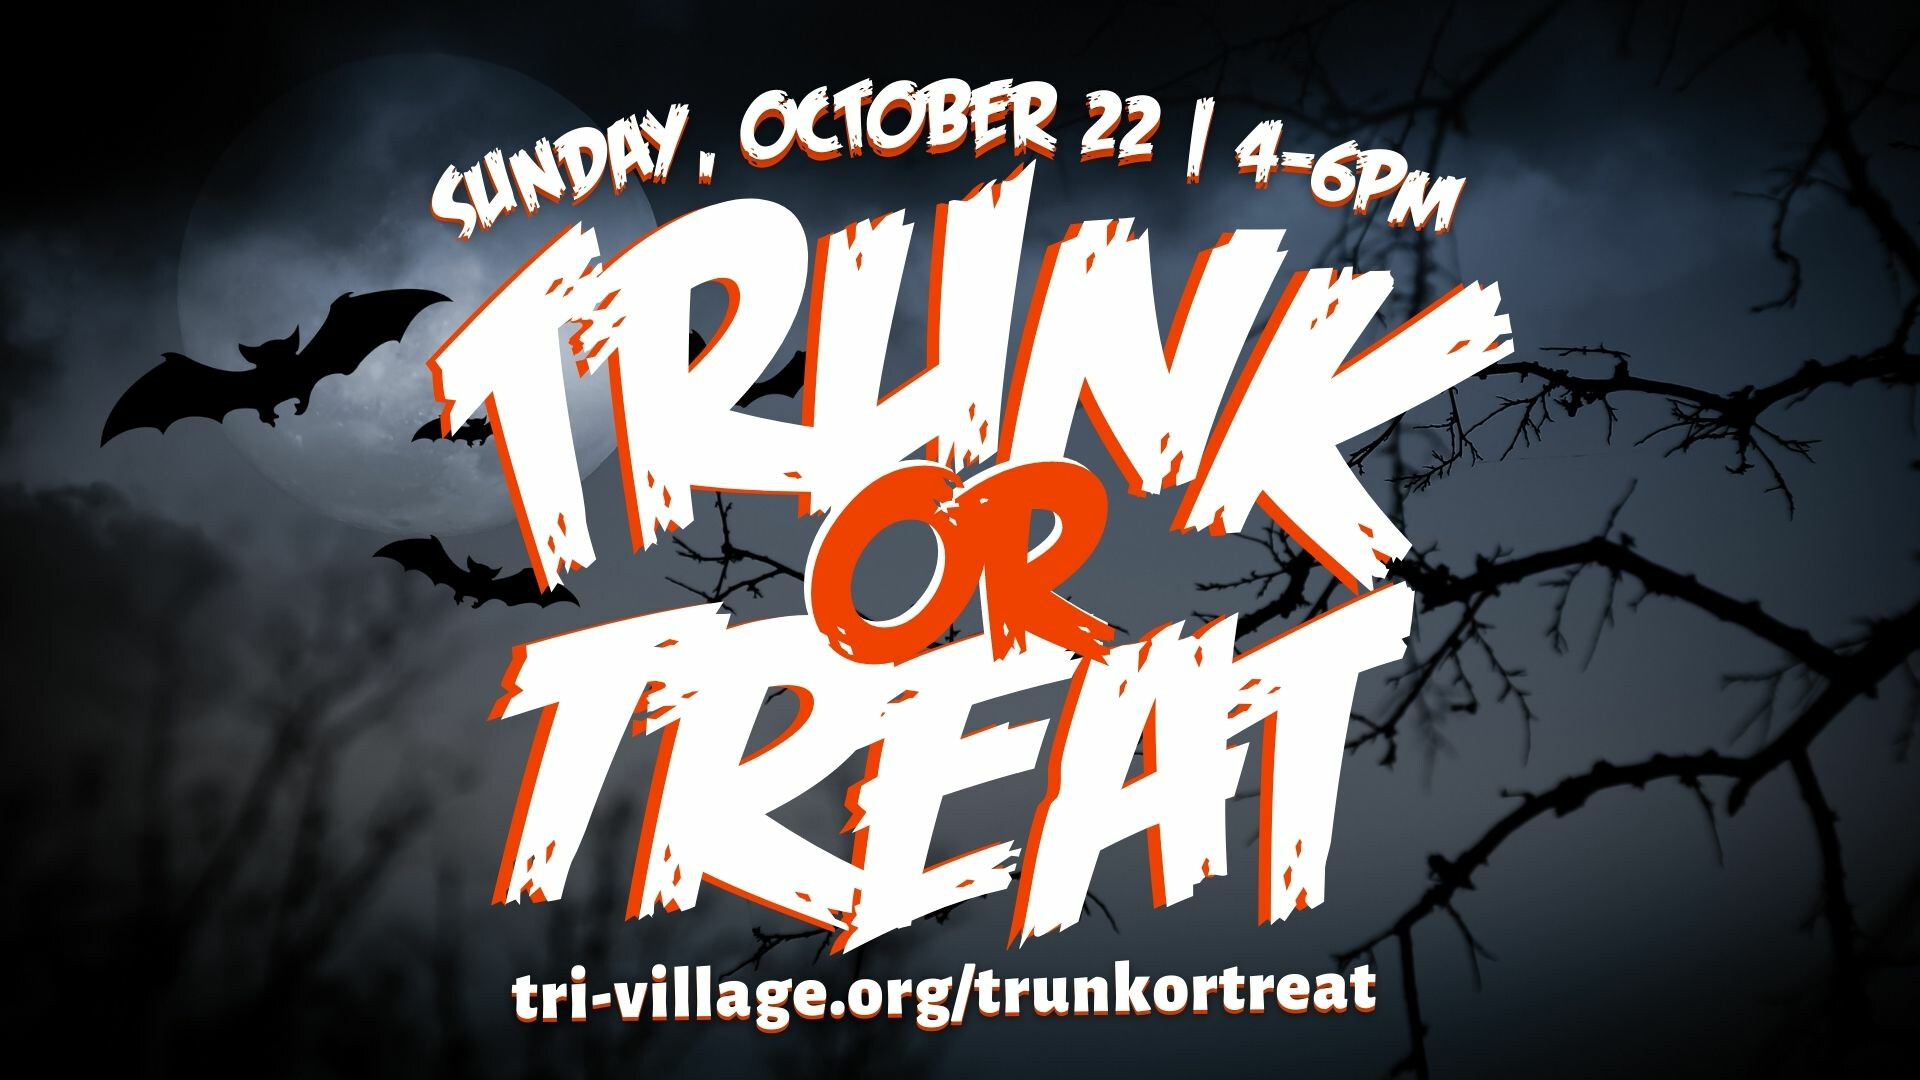 Trunk or Treat (4-6pm)